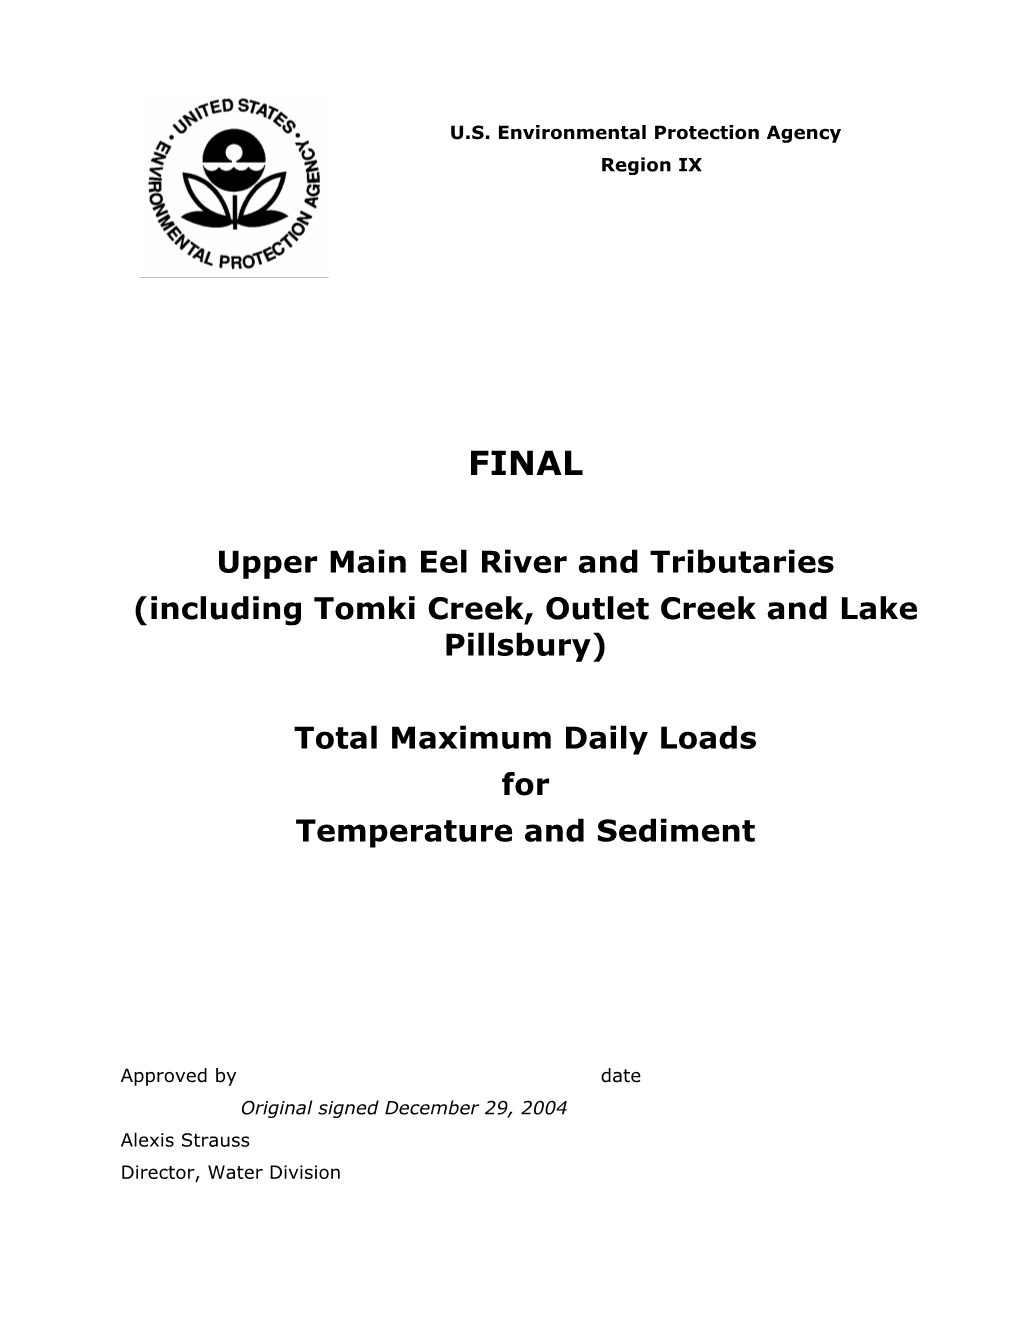 Final Upper Main Eel River and Tributaries (Including